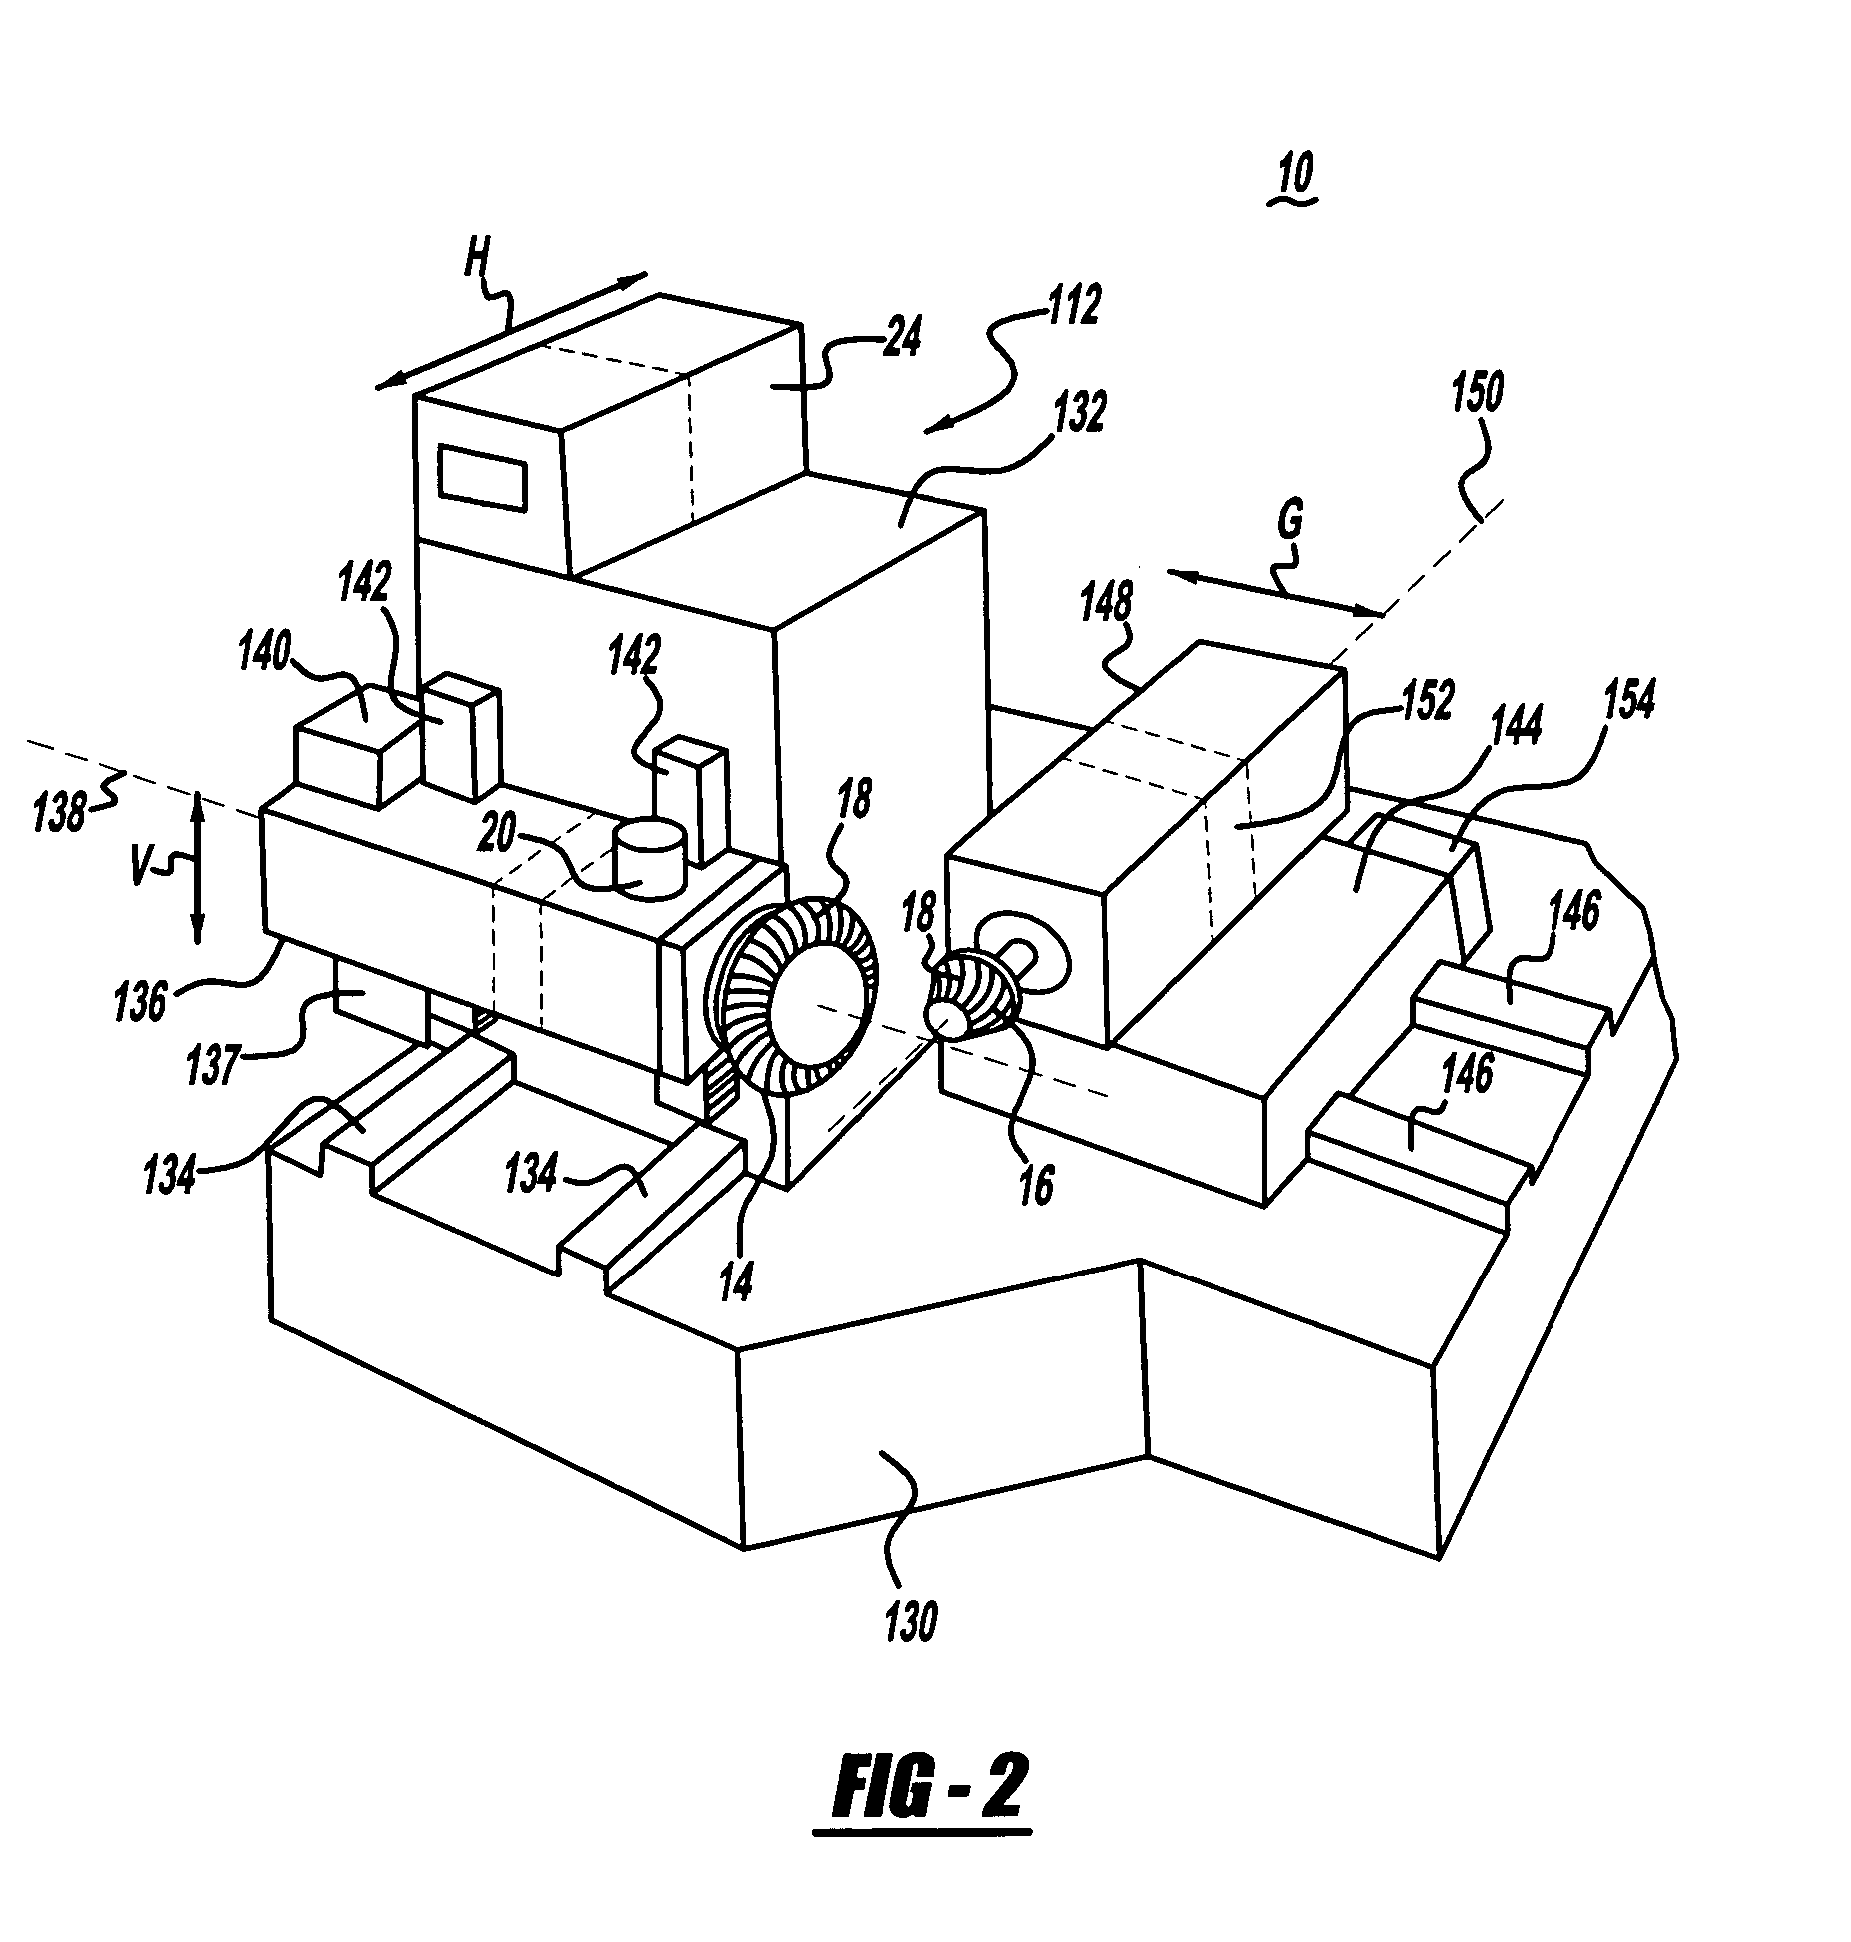 Method and apparatus for lapping gears